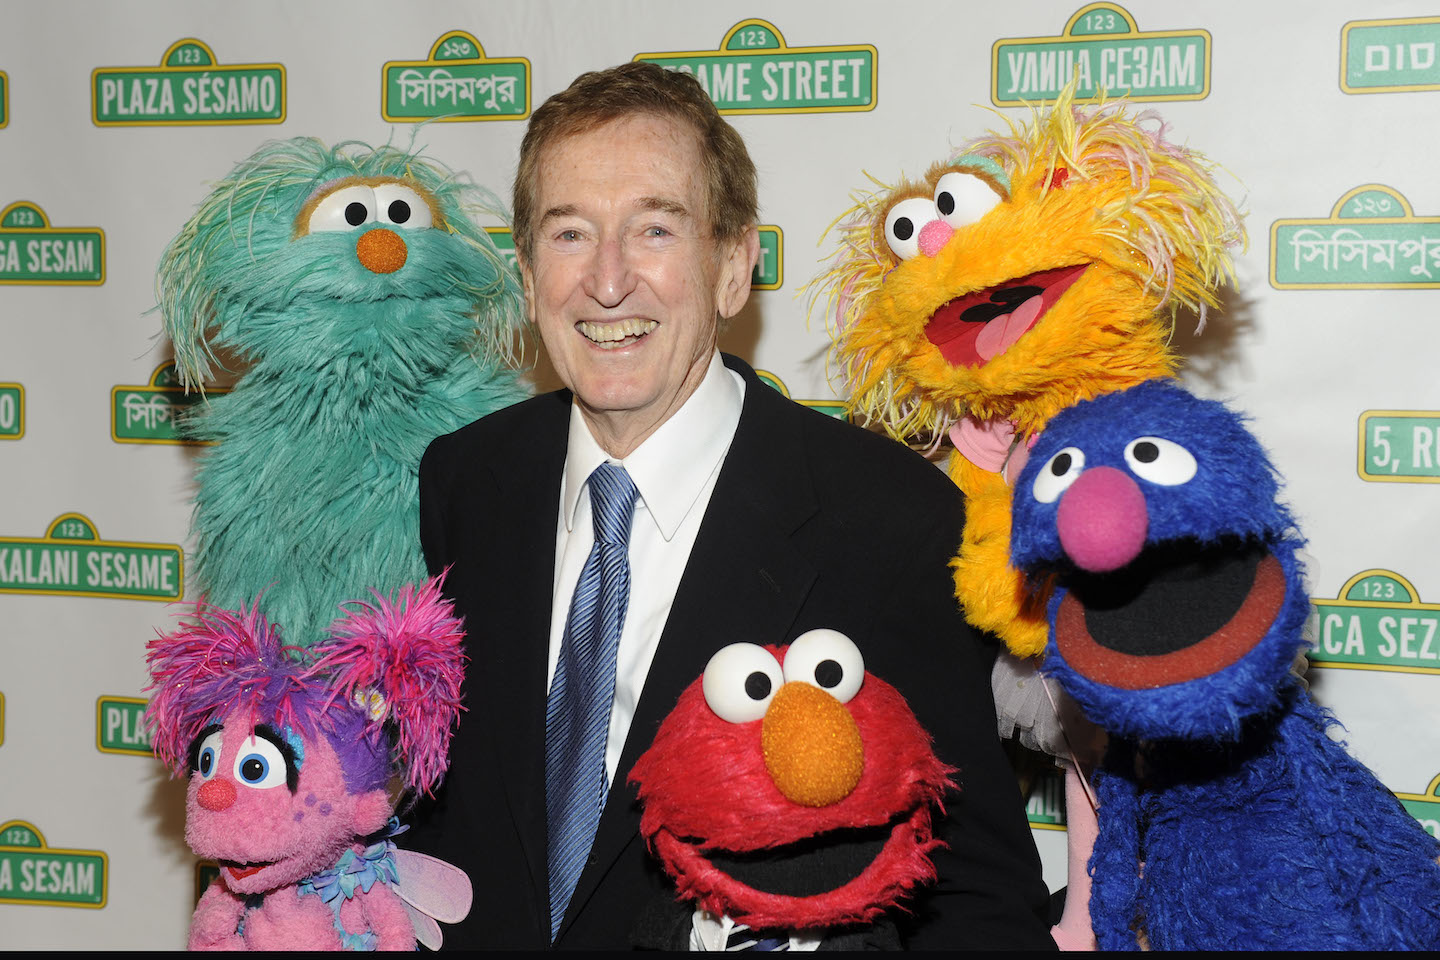 'Sesame Street' star Bob McGrath smiling while surrounded by Muppets